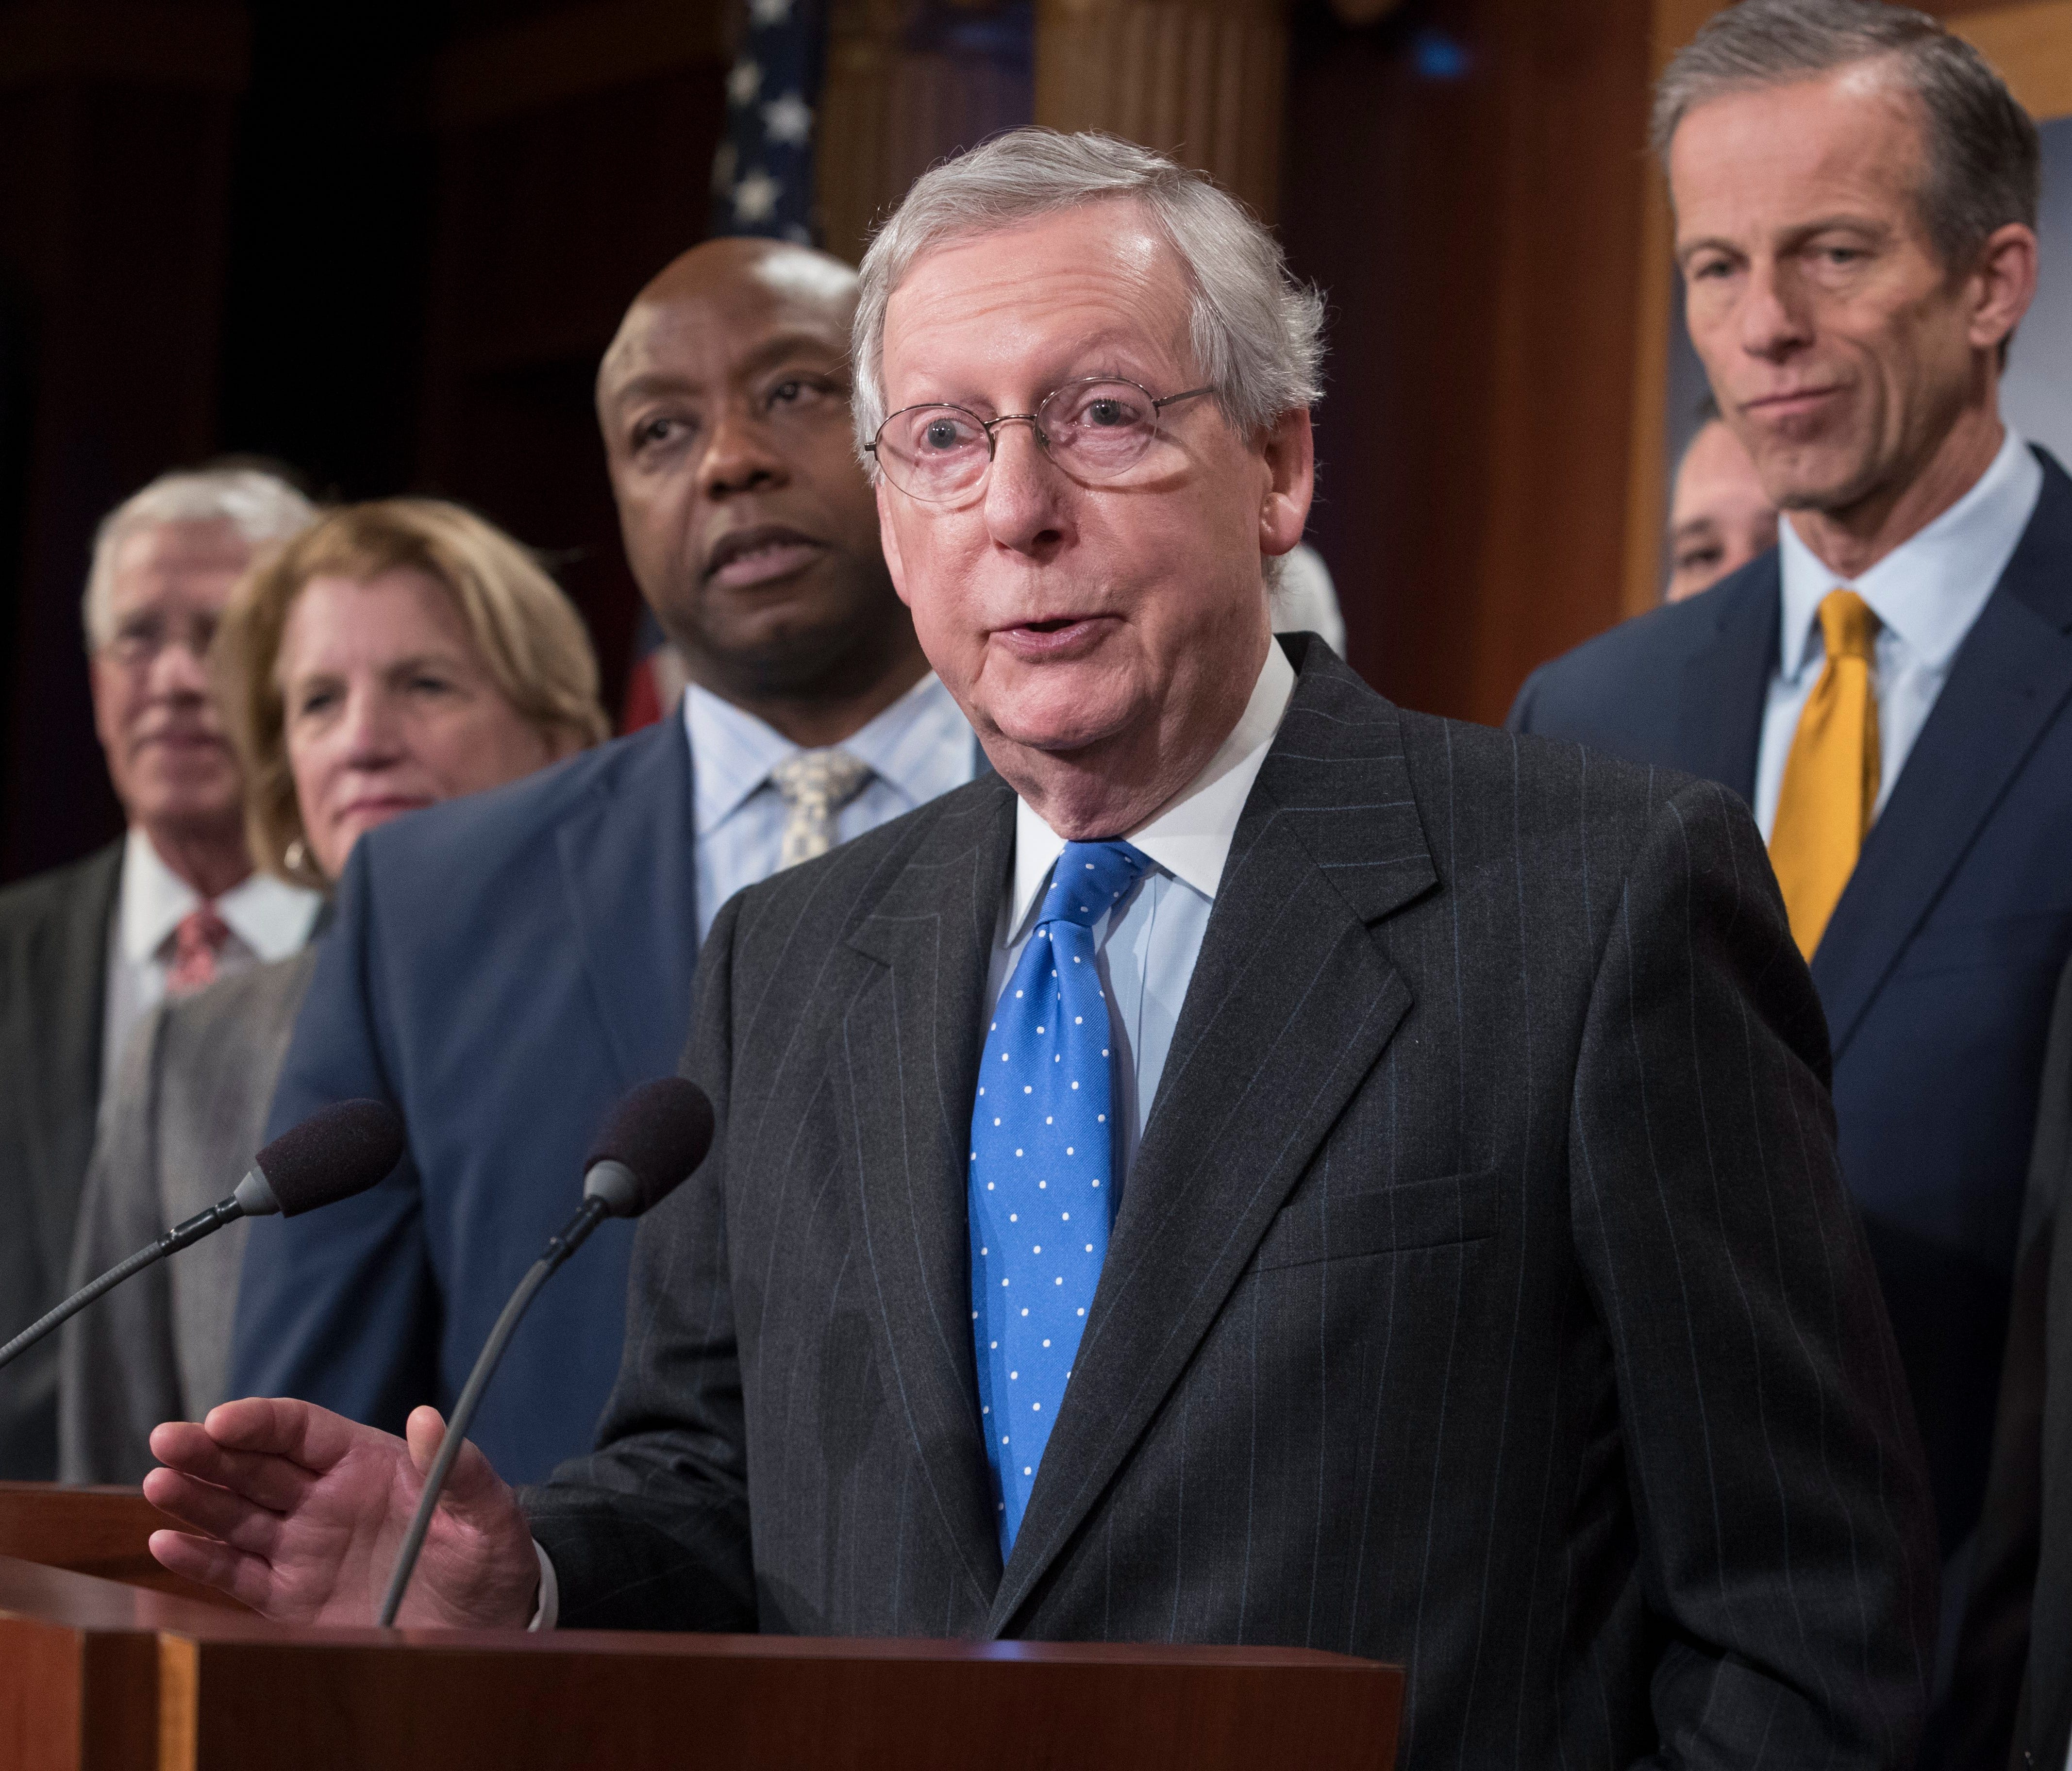 Senate Majority Leader Republican Mitch McConnell (C) is pictured speaking beside other Senate Republicans during a news conference after the Senate passed the Republican tax plan early Wednesday.